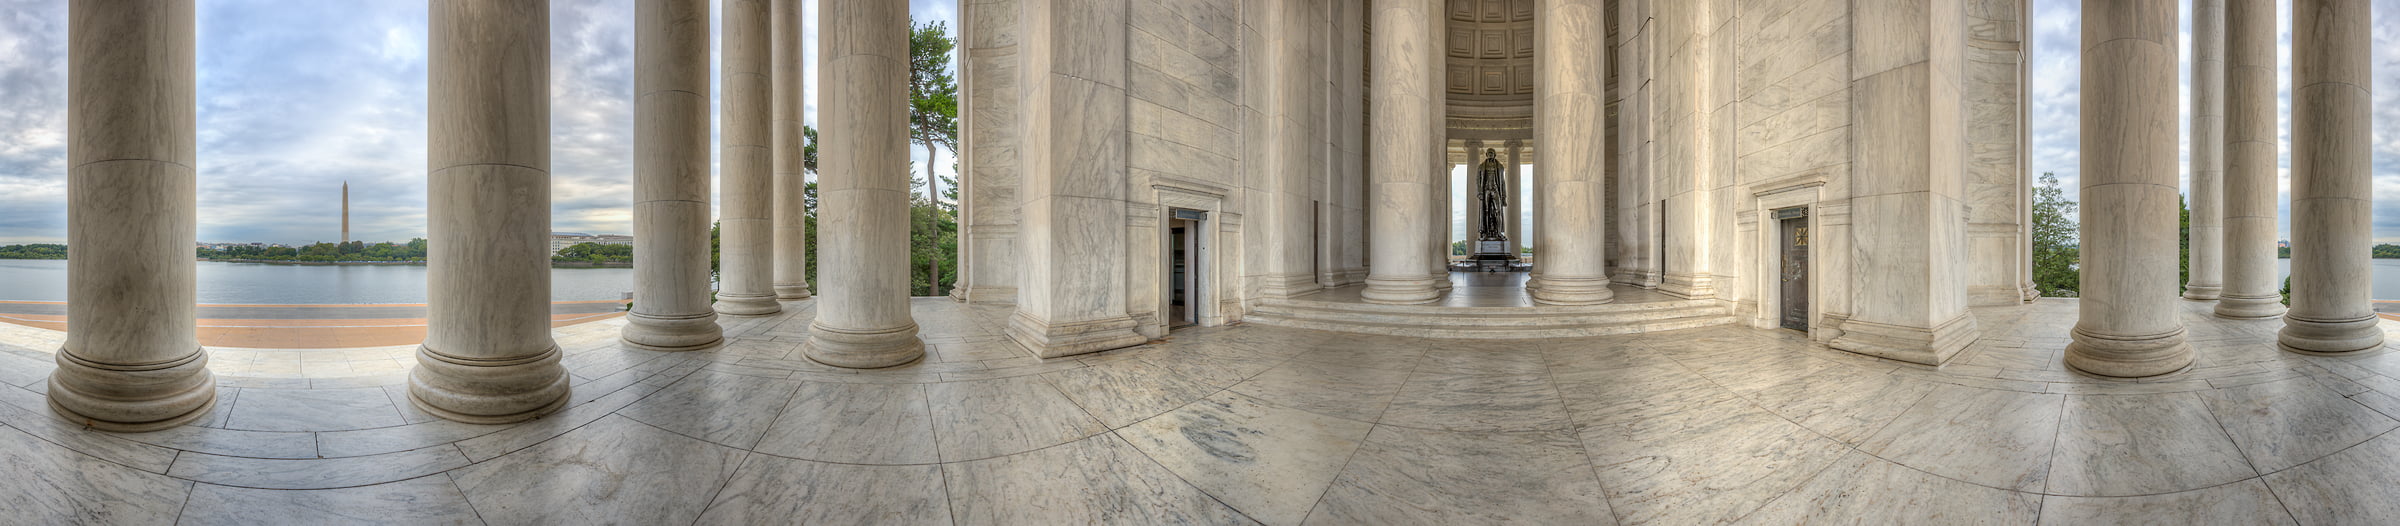 215 megapixels! A very high resolution, large-format VAST photo print of the Jefferson Memorial; panorama photograph created by Tim Lo Monaco in Thomas Jefferson Memorial, National Mall, Washington, D.C.